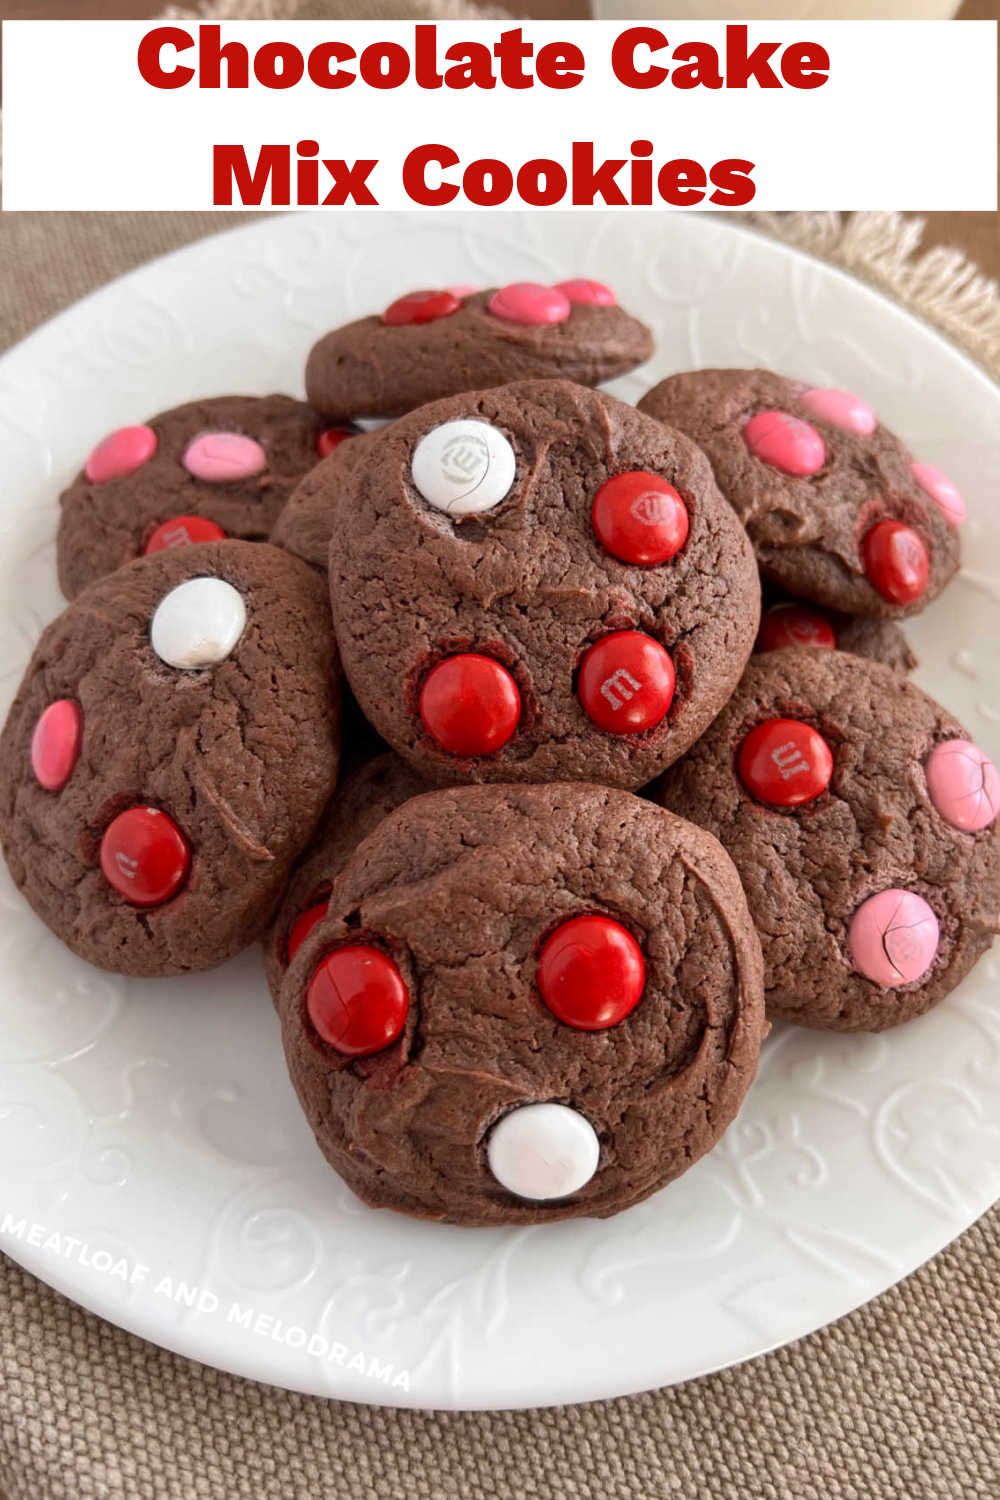 Chocolate Cake Mix Cookies are delicious cookies made with a box of cake mix and simple ingredients. An easy cookie recipe anyone can make! Everyone loves these soft, chewy cookies! via @meamel